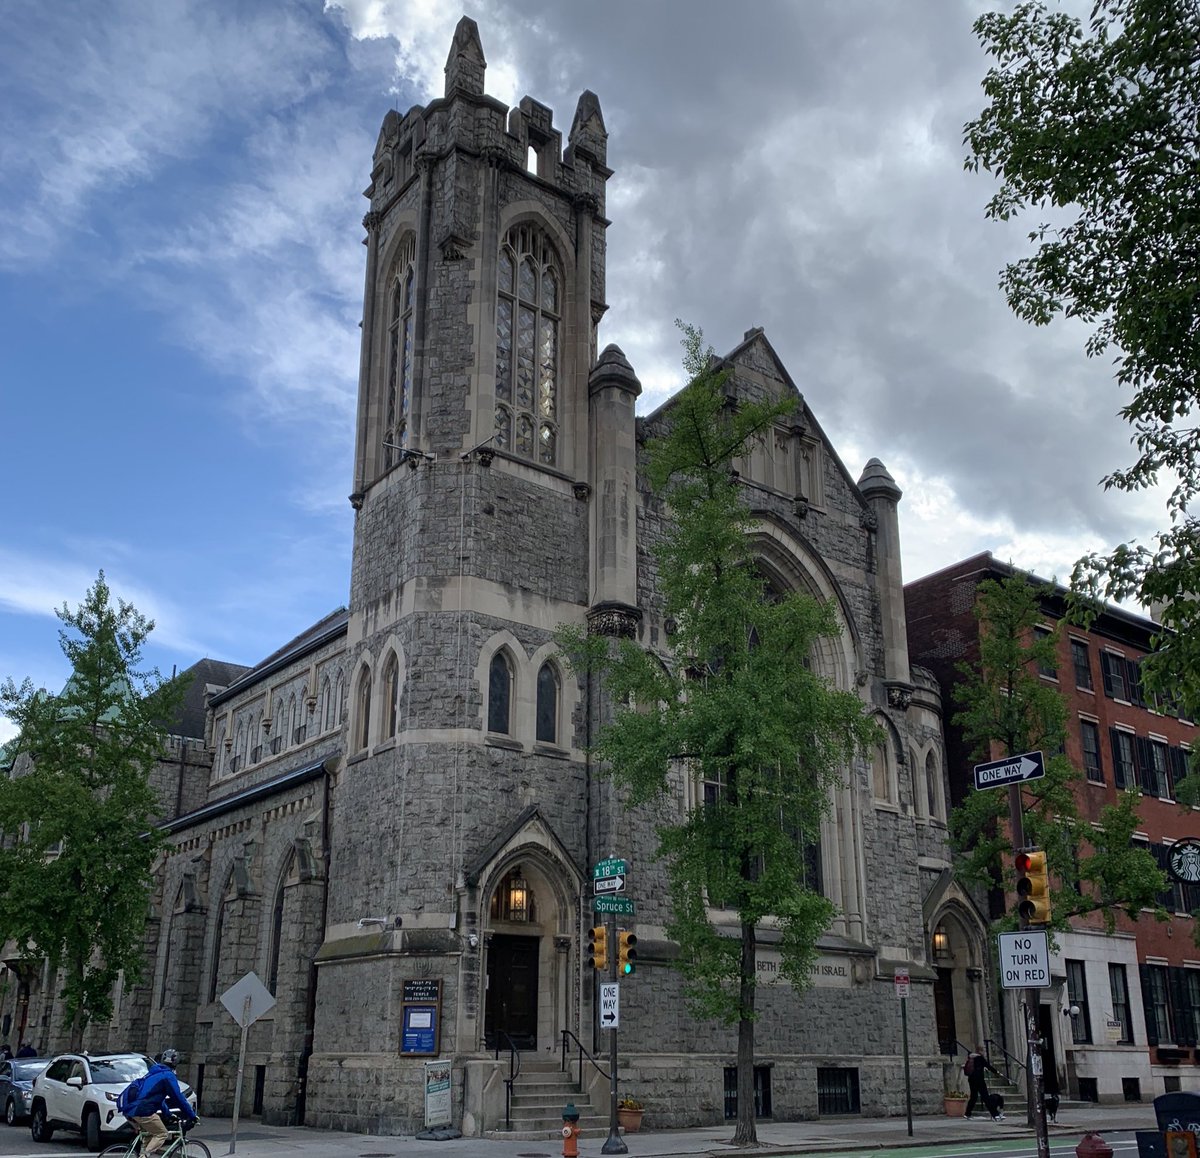 Breaking - a 12 month old baby has been stabbed outside of the Temple Beth Zion-Beth Israel in Philadelphia. We will update this thread as we learn more.